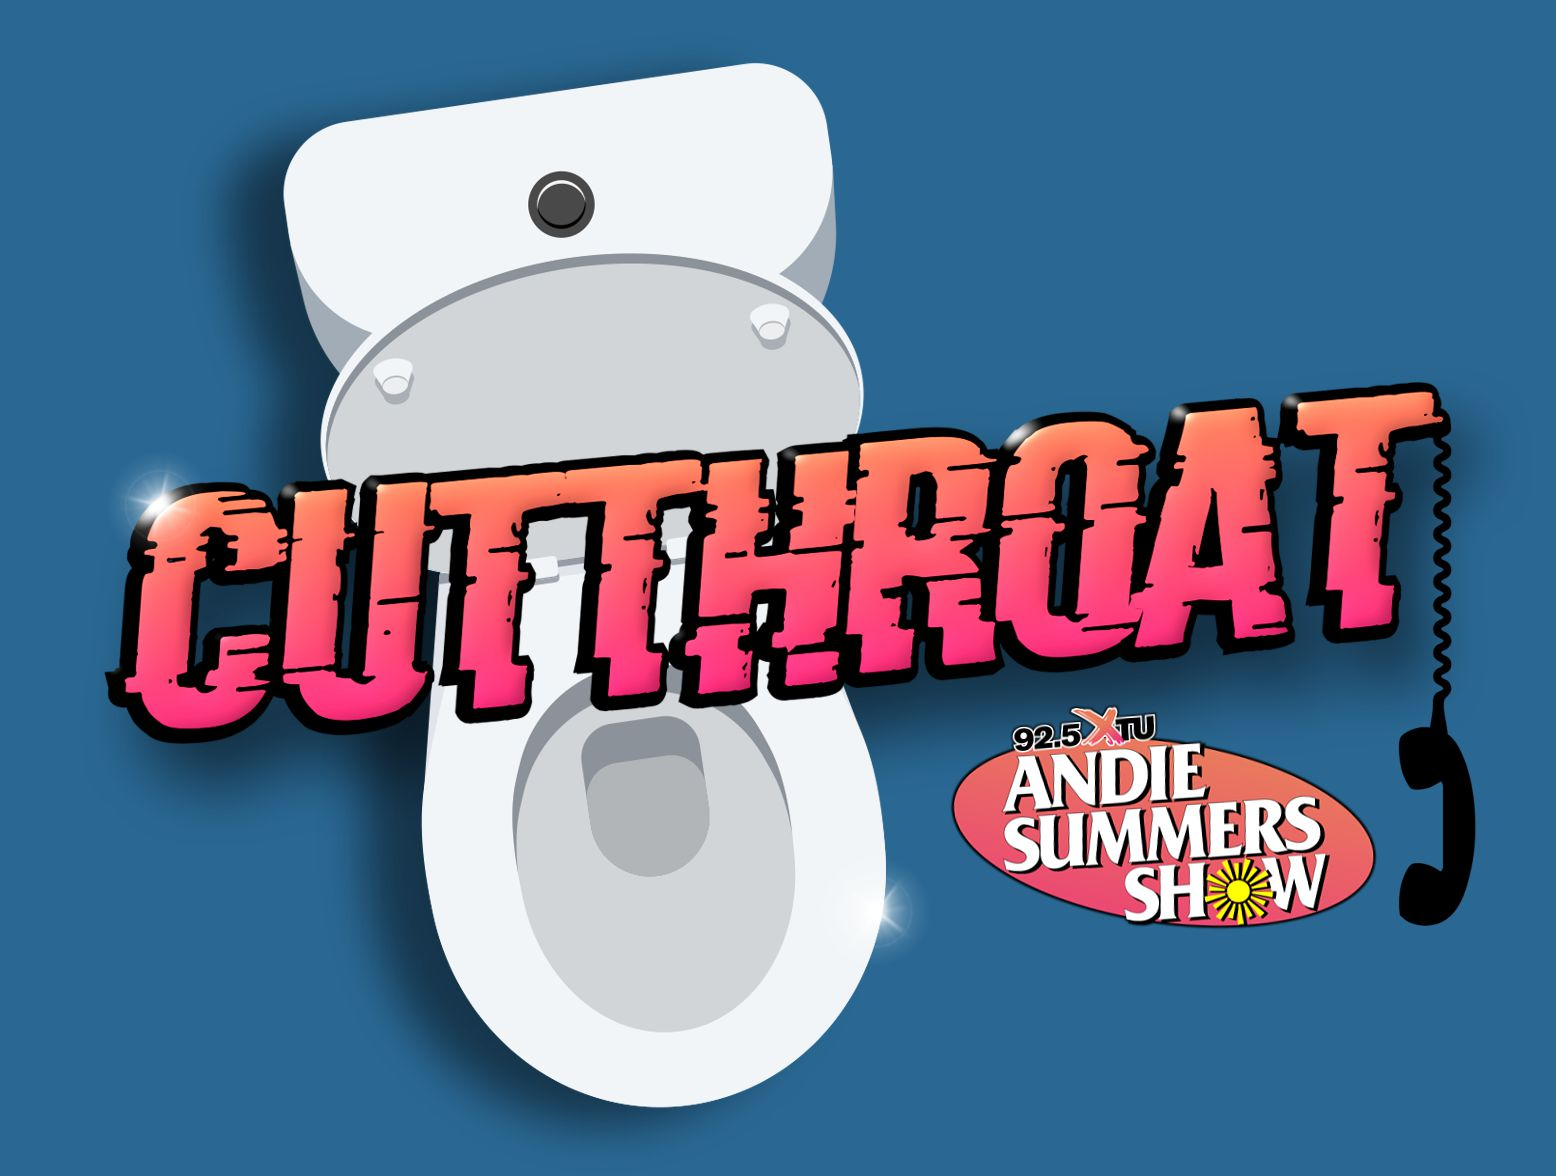 Cutthroat: Famous TV Lines Trivia